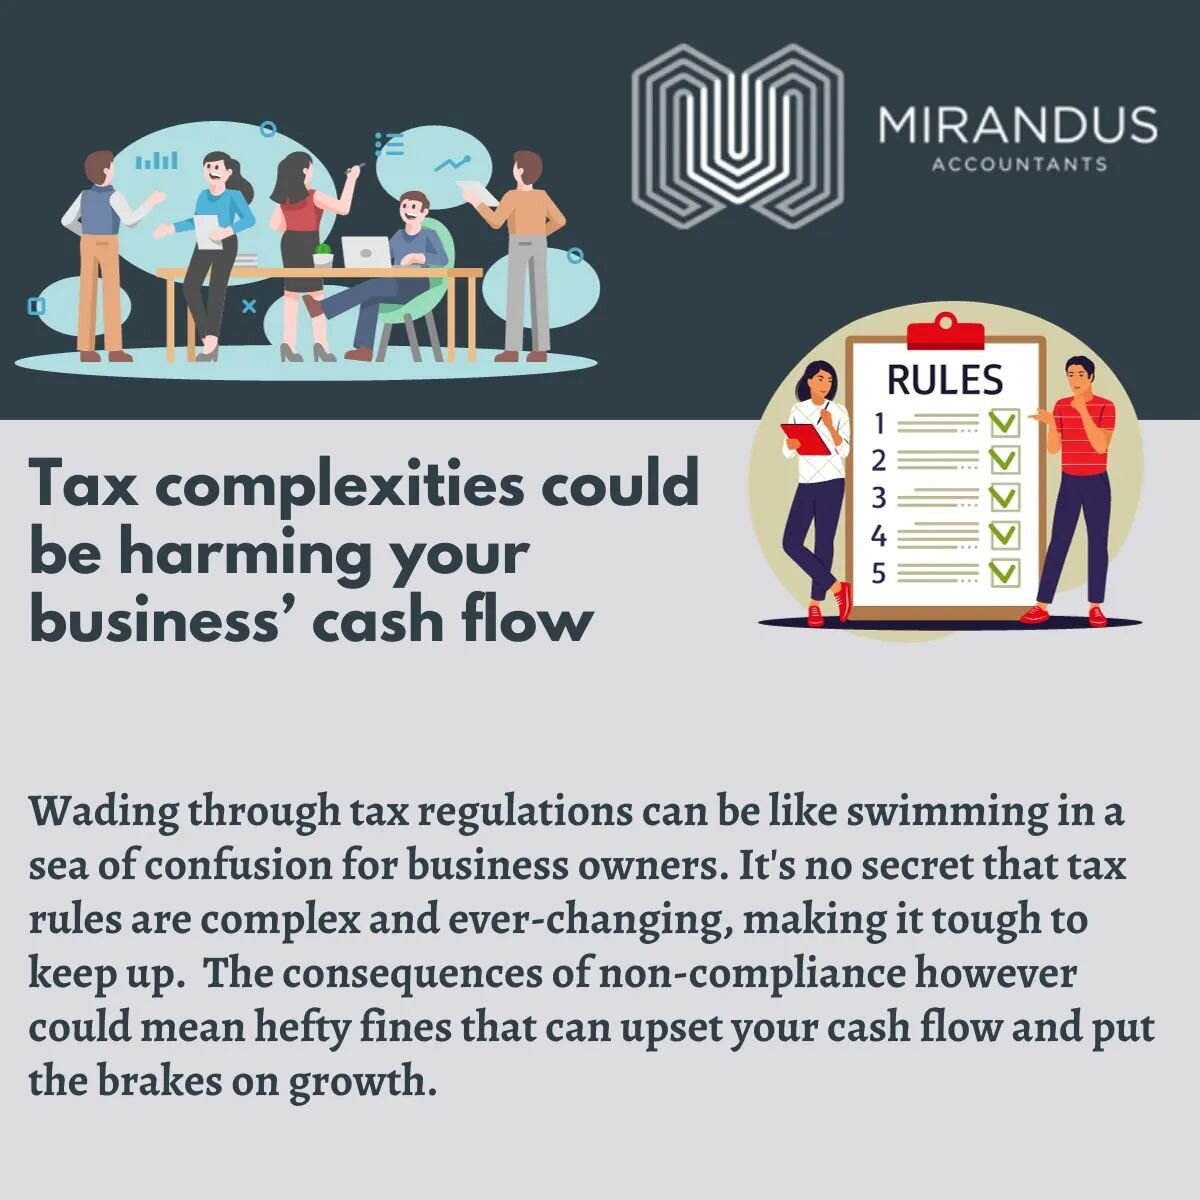 With the autumn statement next week and more tax updates coming our way for the upcoming year, you will be forgiven as a business owner if you are still reeling from the Spring Budget back in March and trying to understand how the tax rule changes im